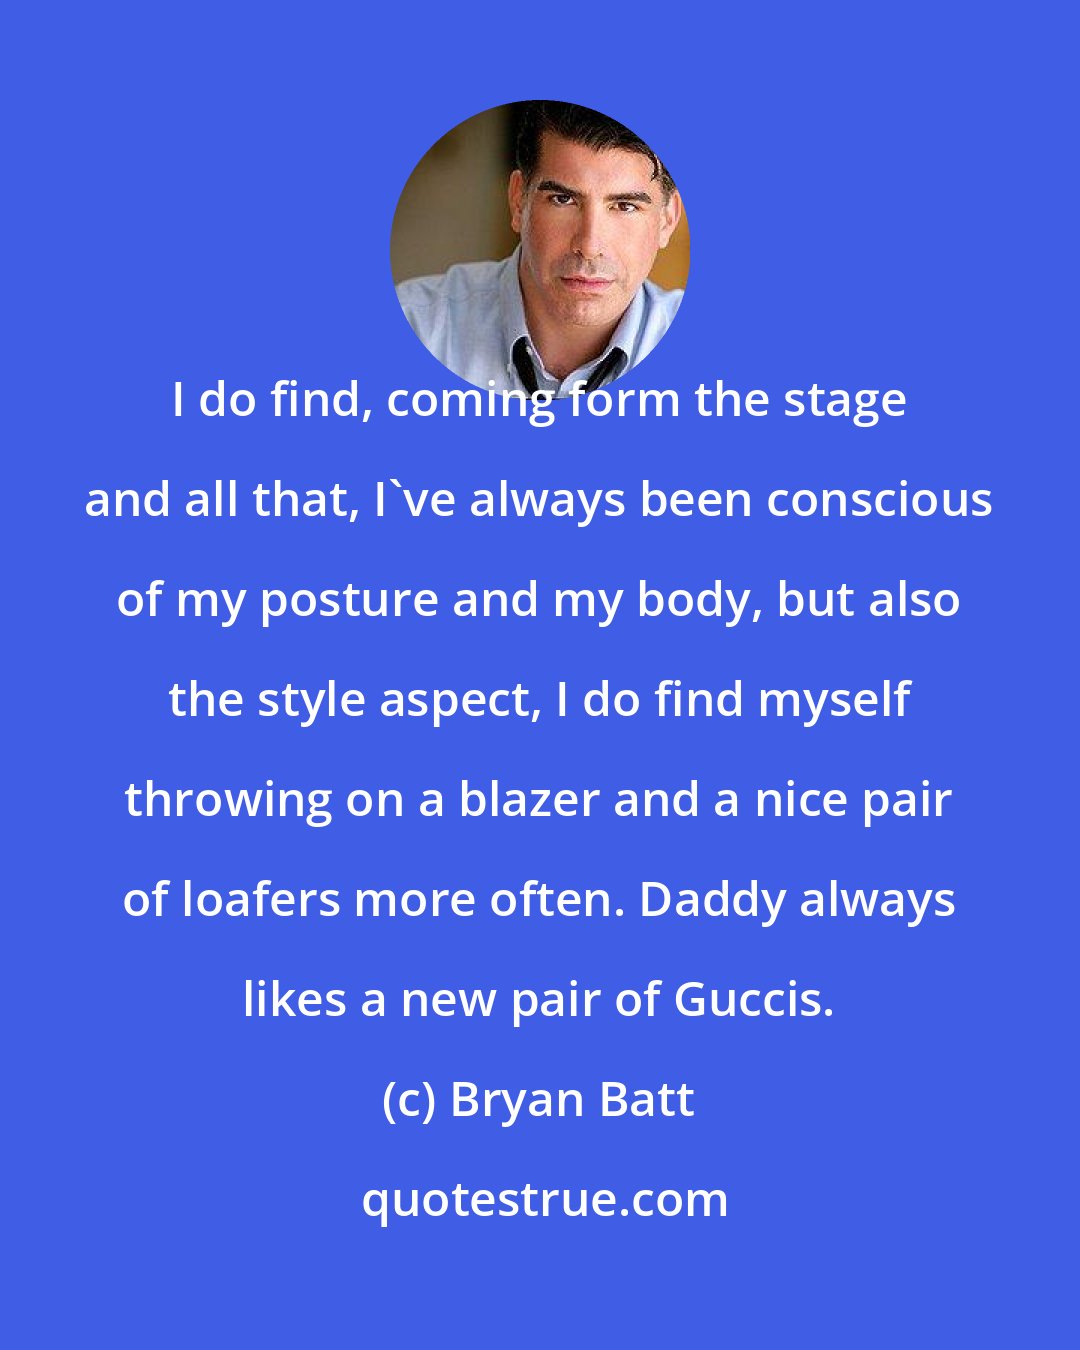 Bryan Batt: I do find, coming form the stage and all that, I've always been conscious of my posture and my body, but also the style aspect, I do find myself throwing on a blazer and a nice pair of loafers more often. Daddy always likes a new pair of Guccis.